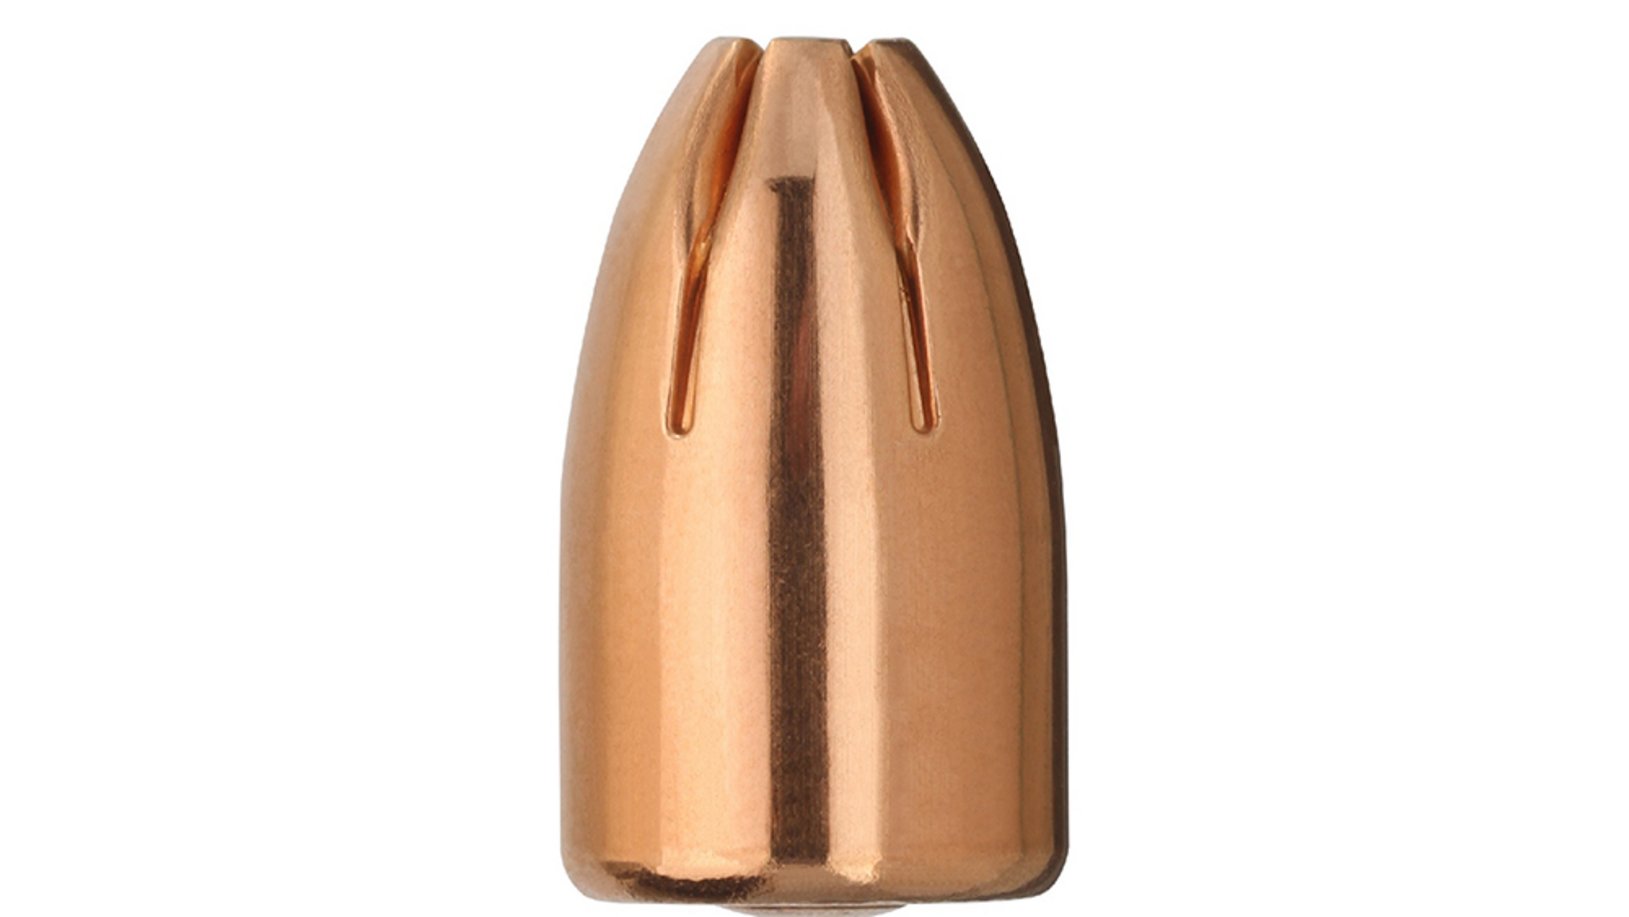 Frontview of ammunition of GECO HEXAGON 8,0g